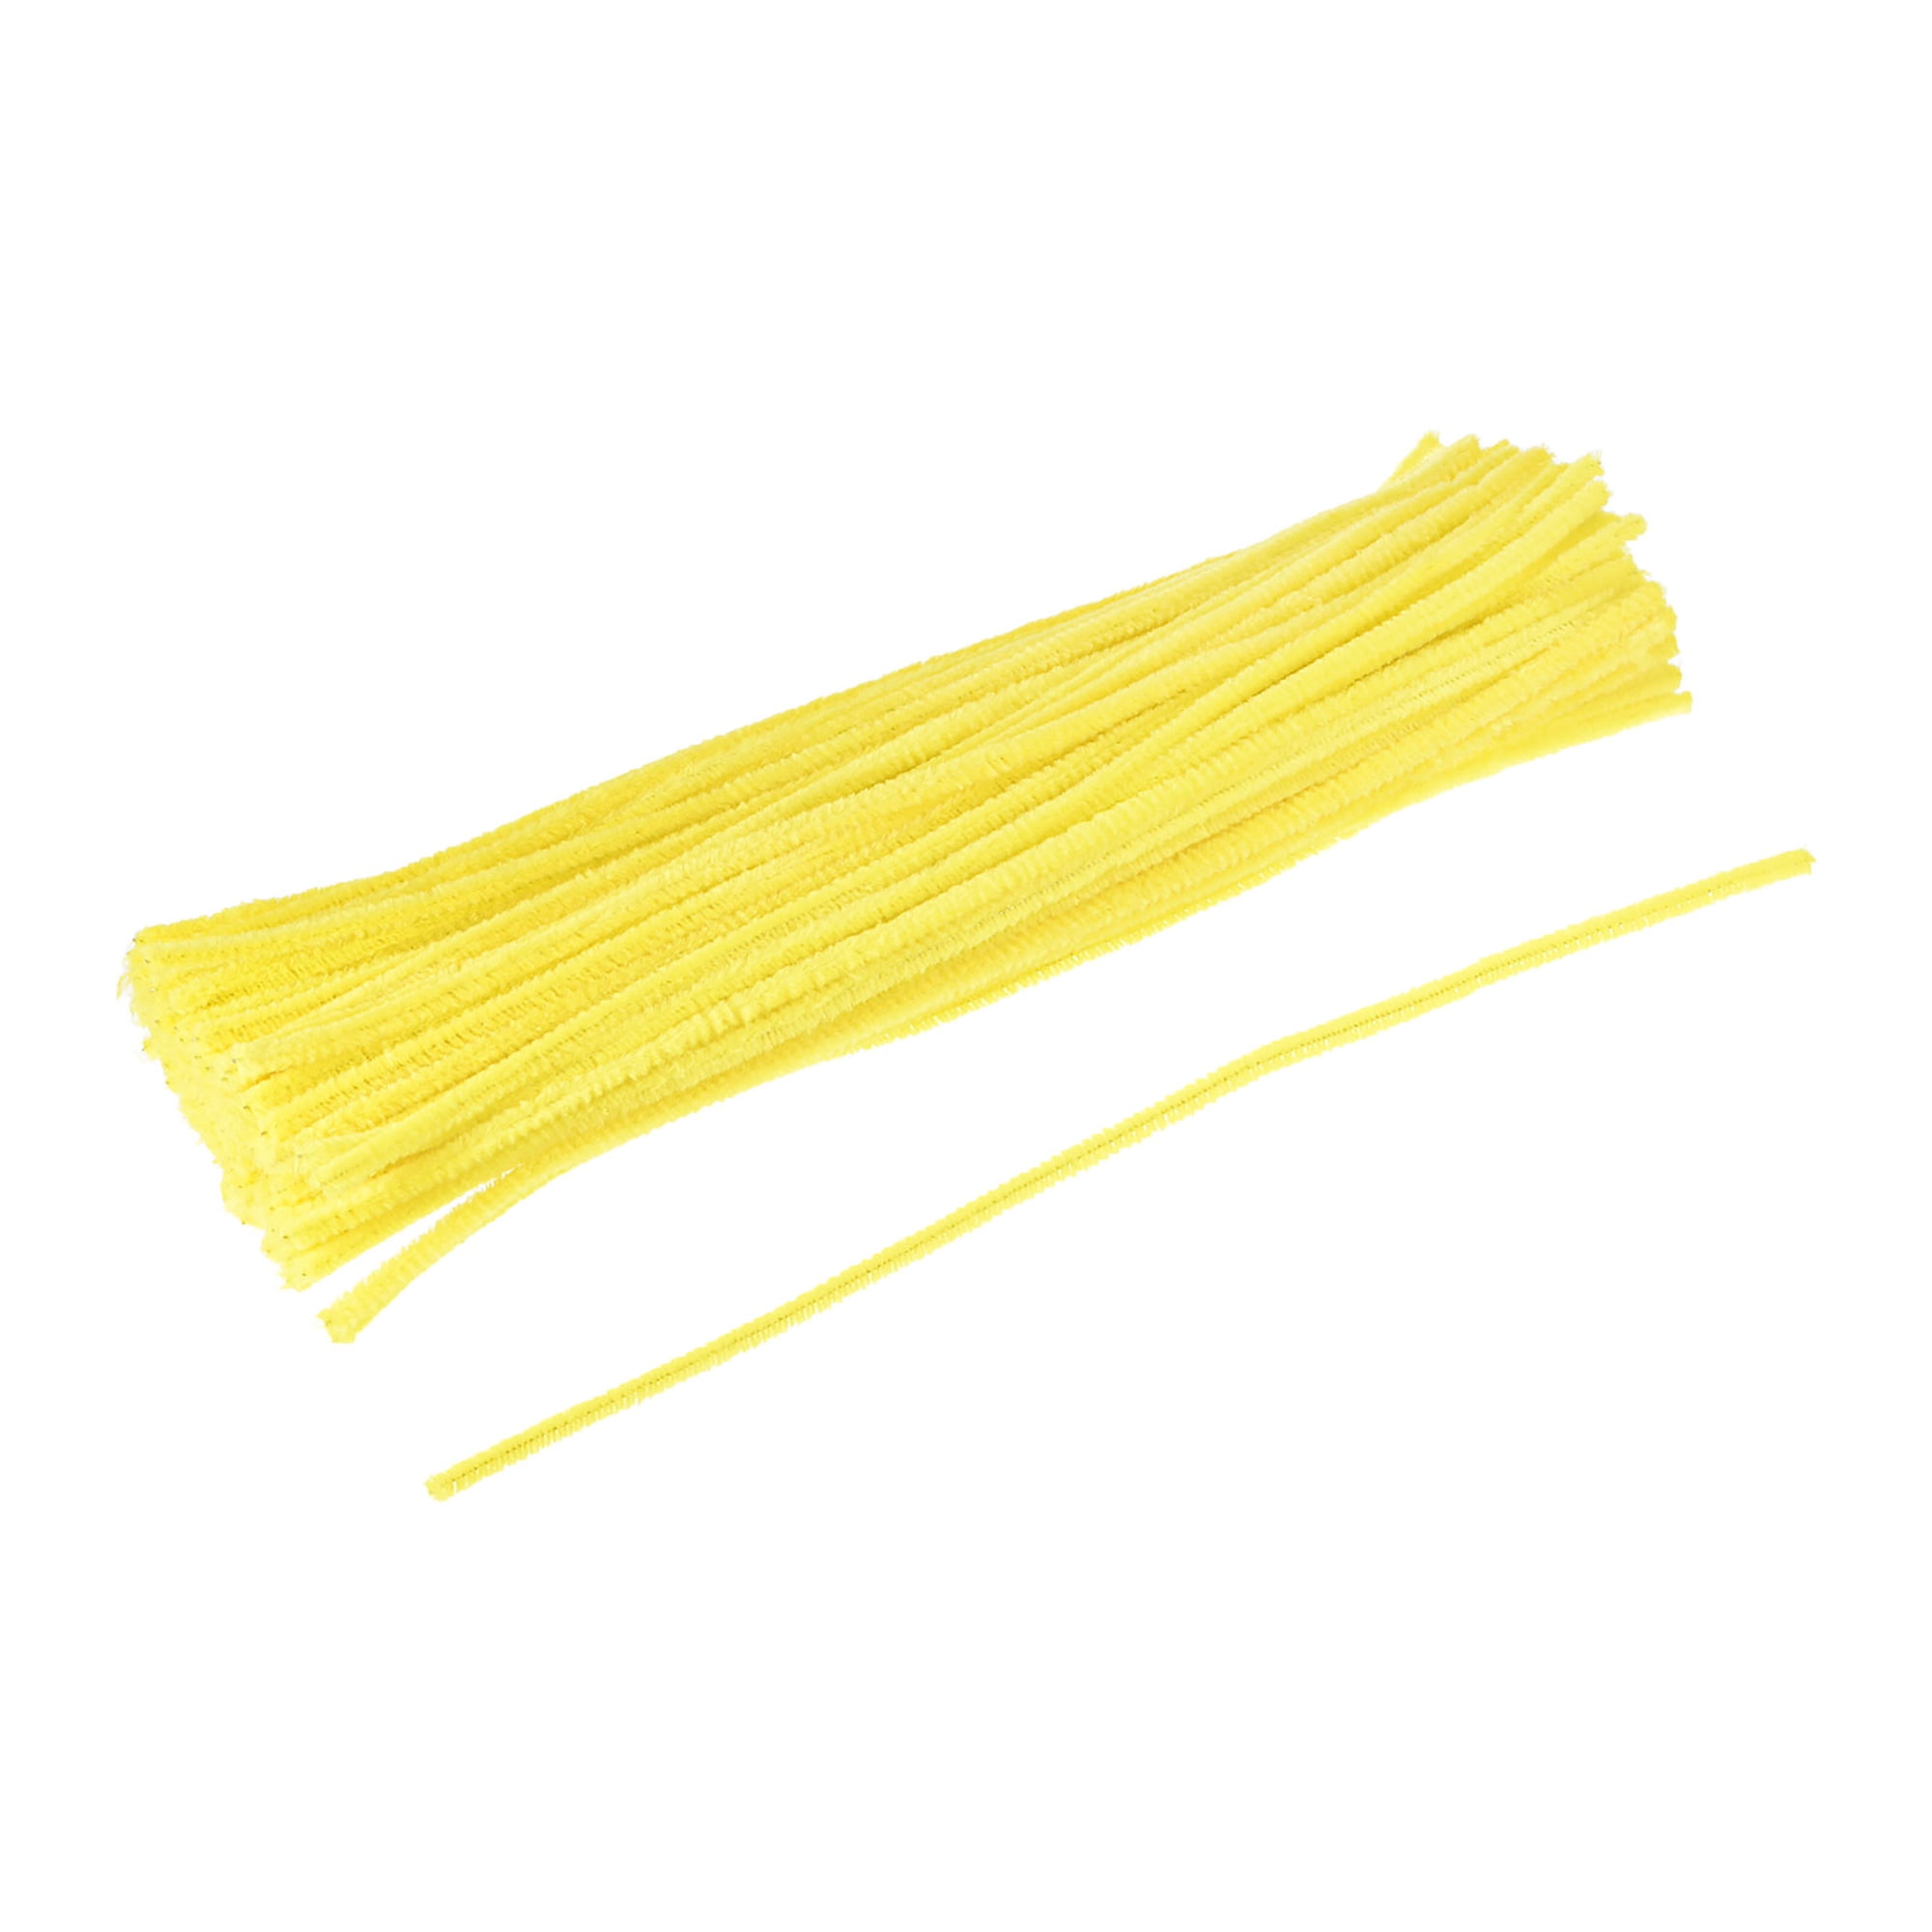 Chenille Stems Pipe Cleaners 12 Inch x 6mm 100-Piece, Yellow